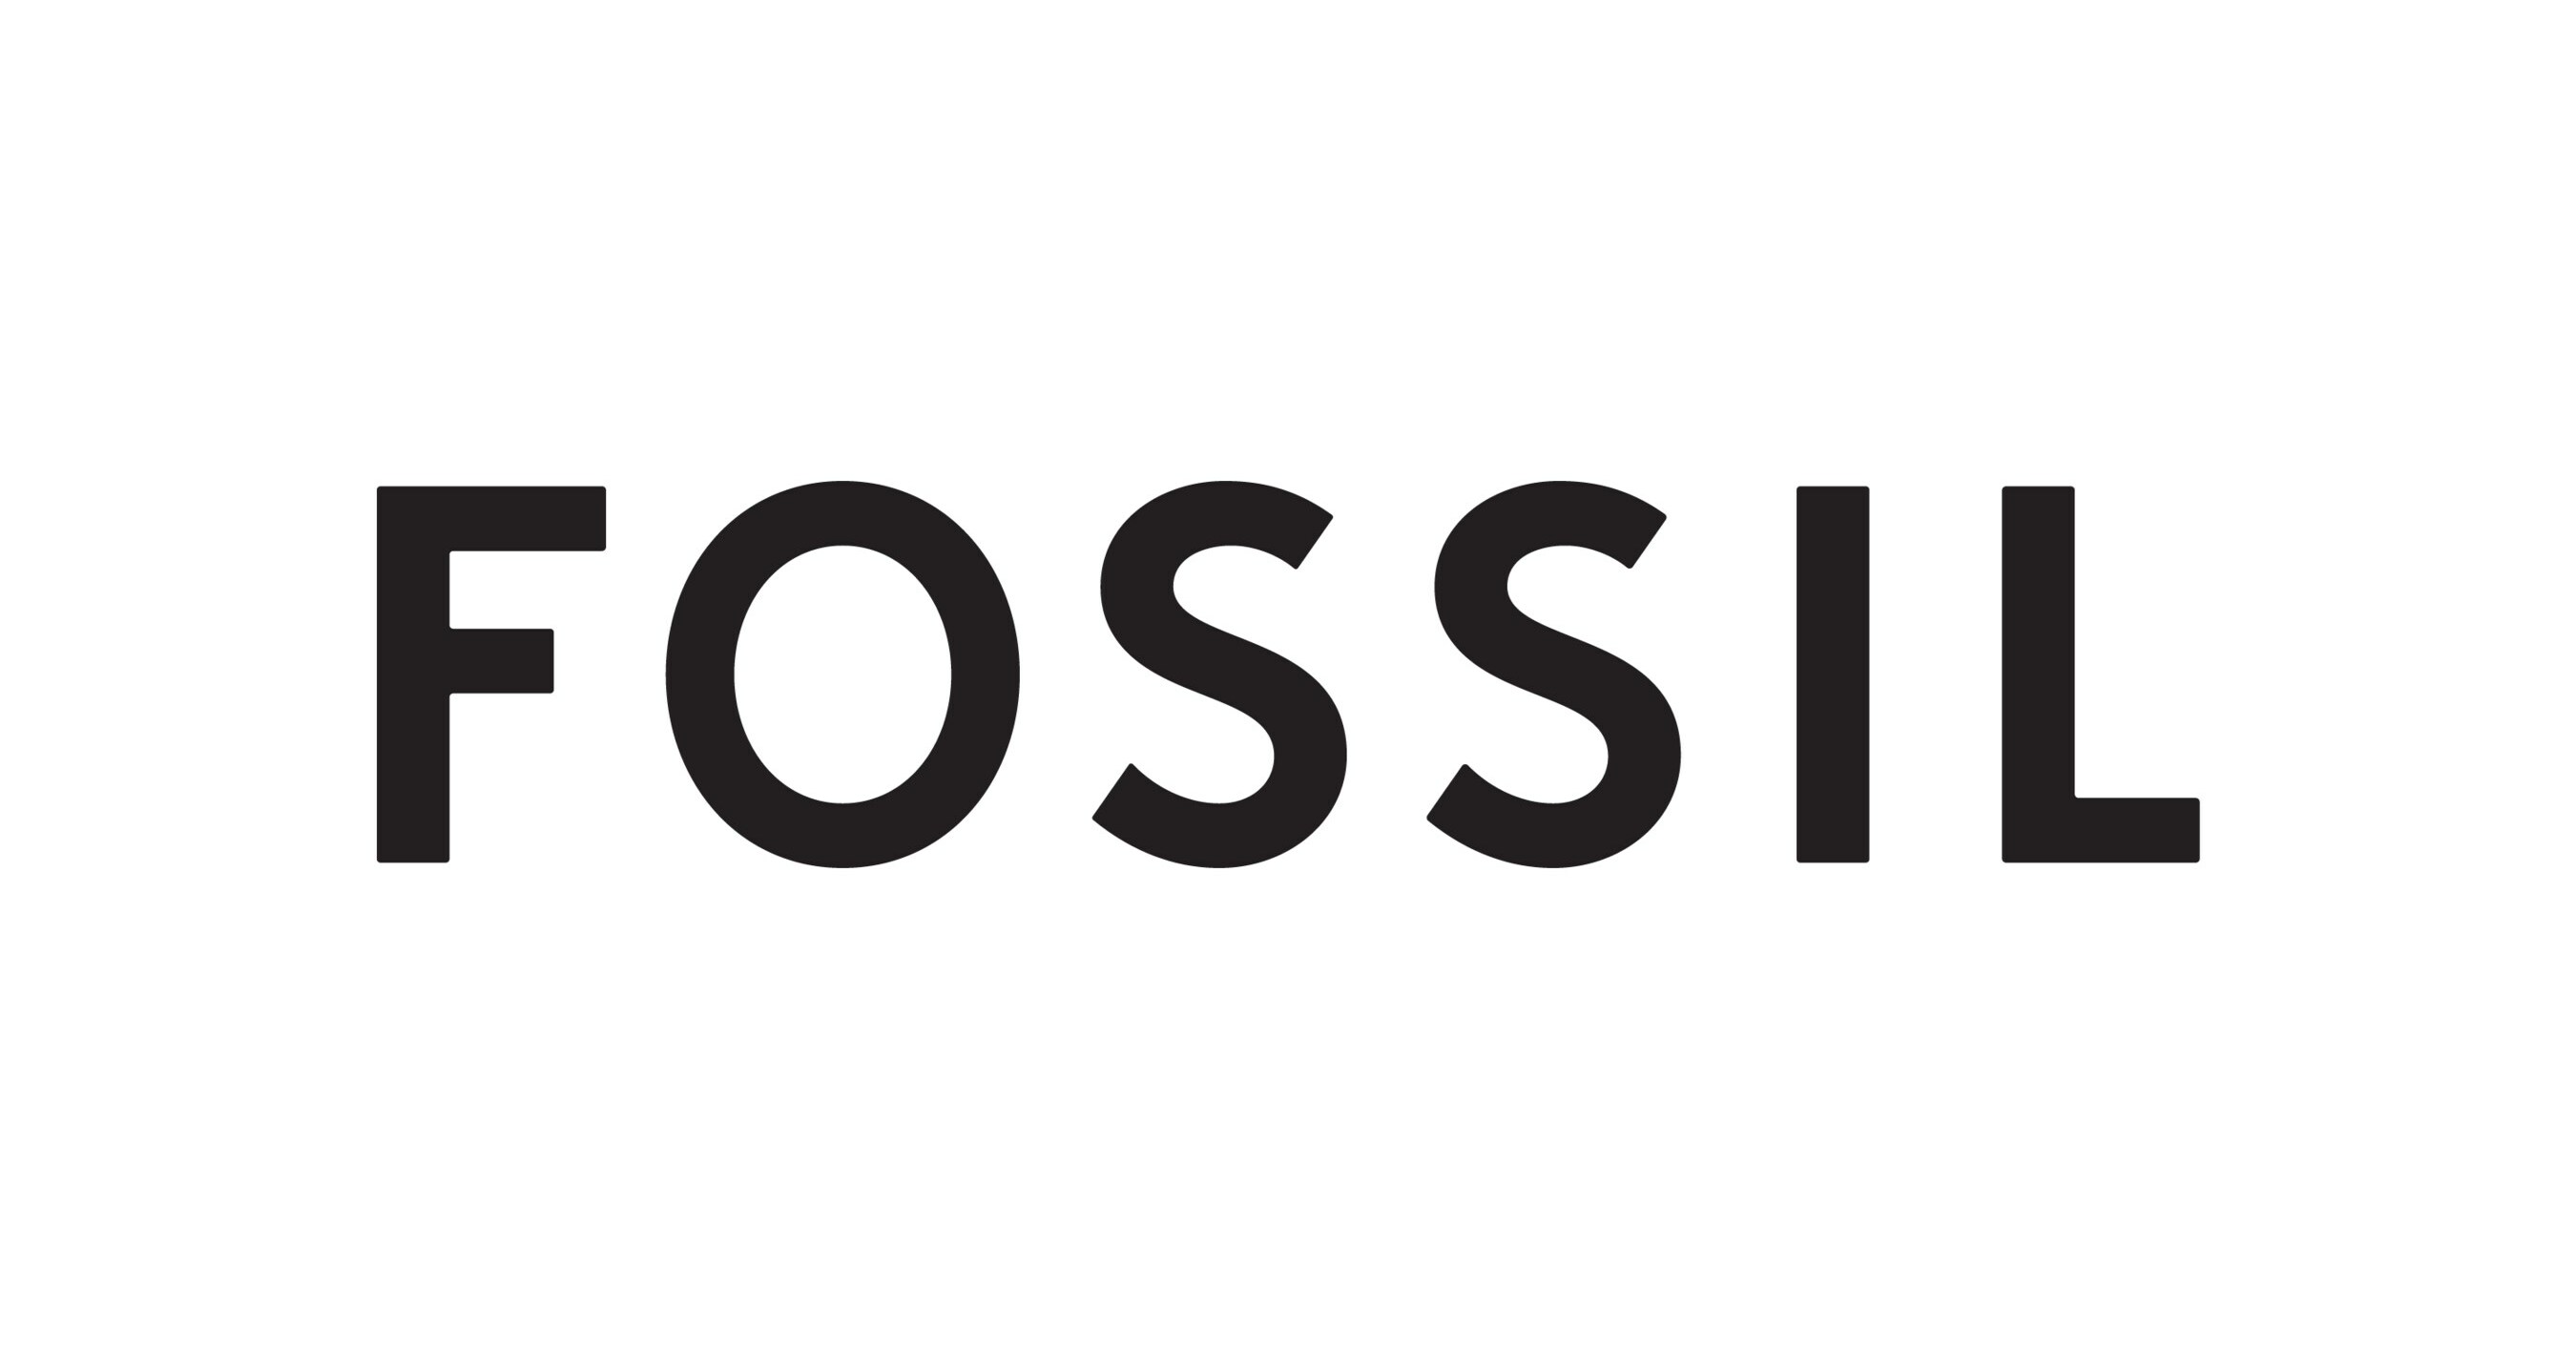 Fossil - Fossil Generation 6 Smartwatches at 40% off!